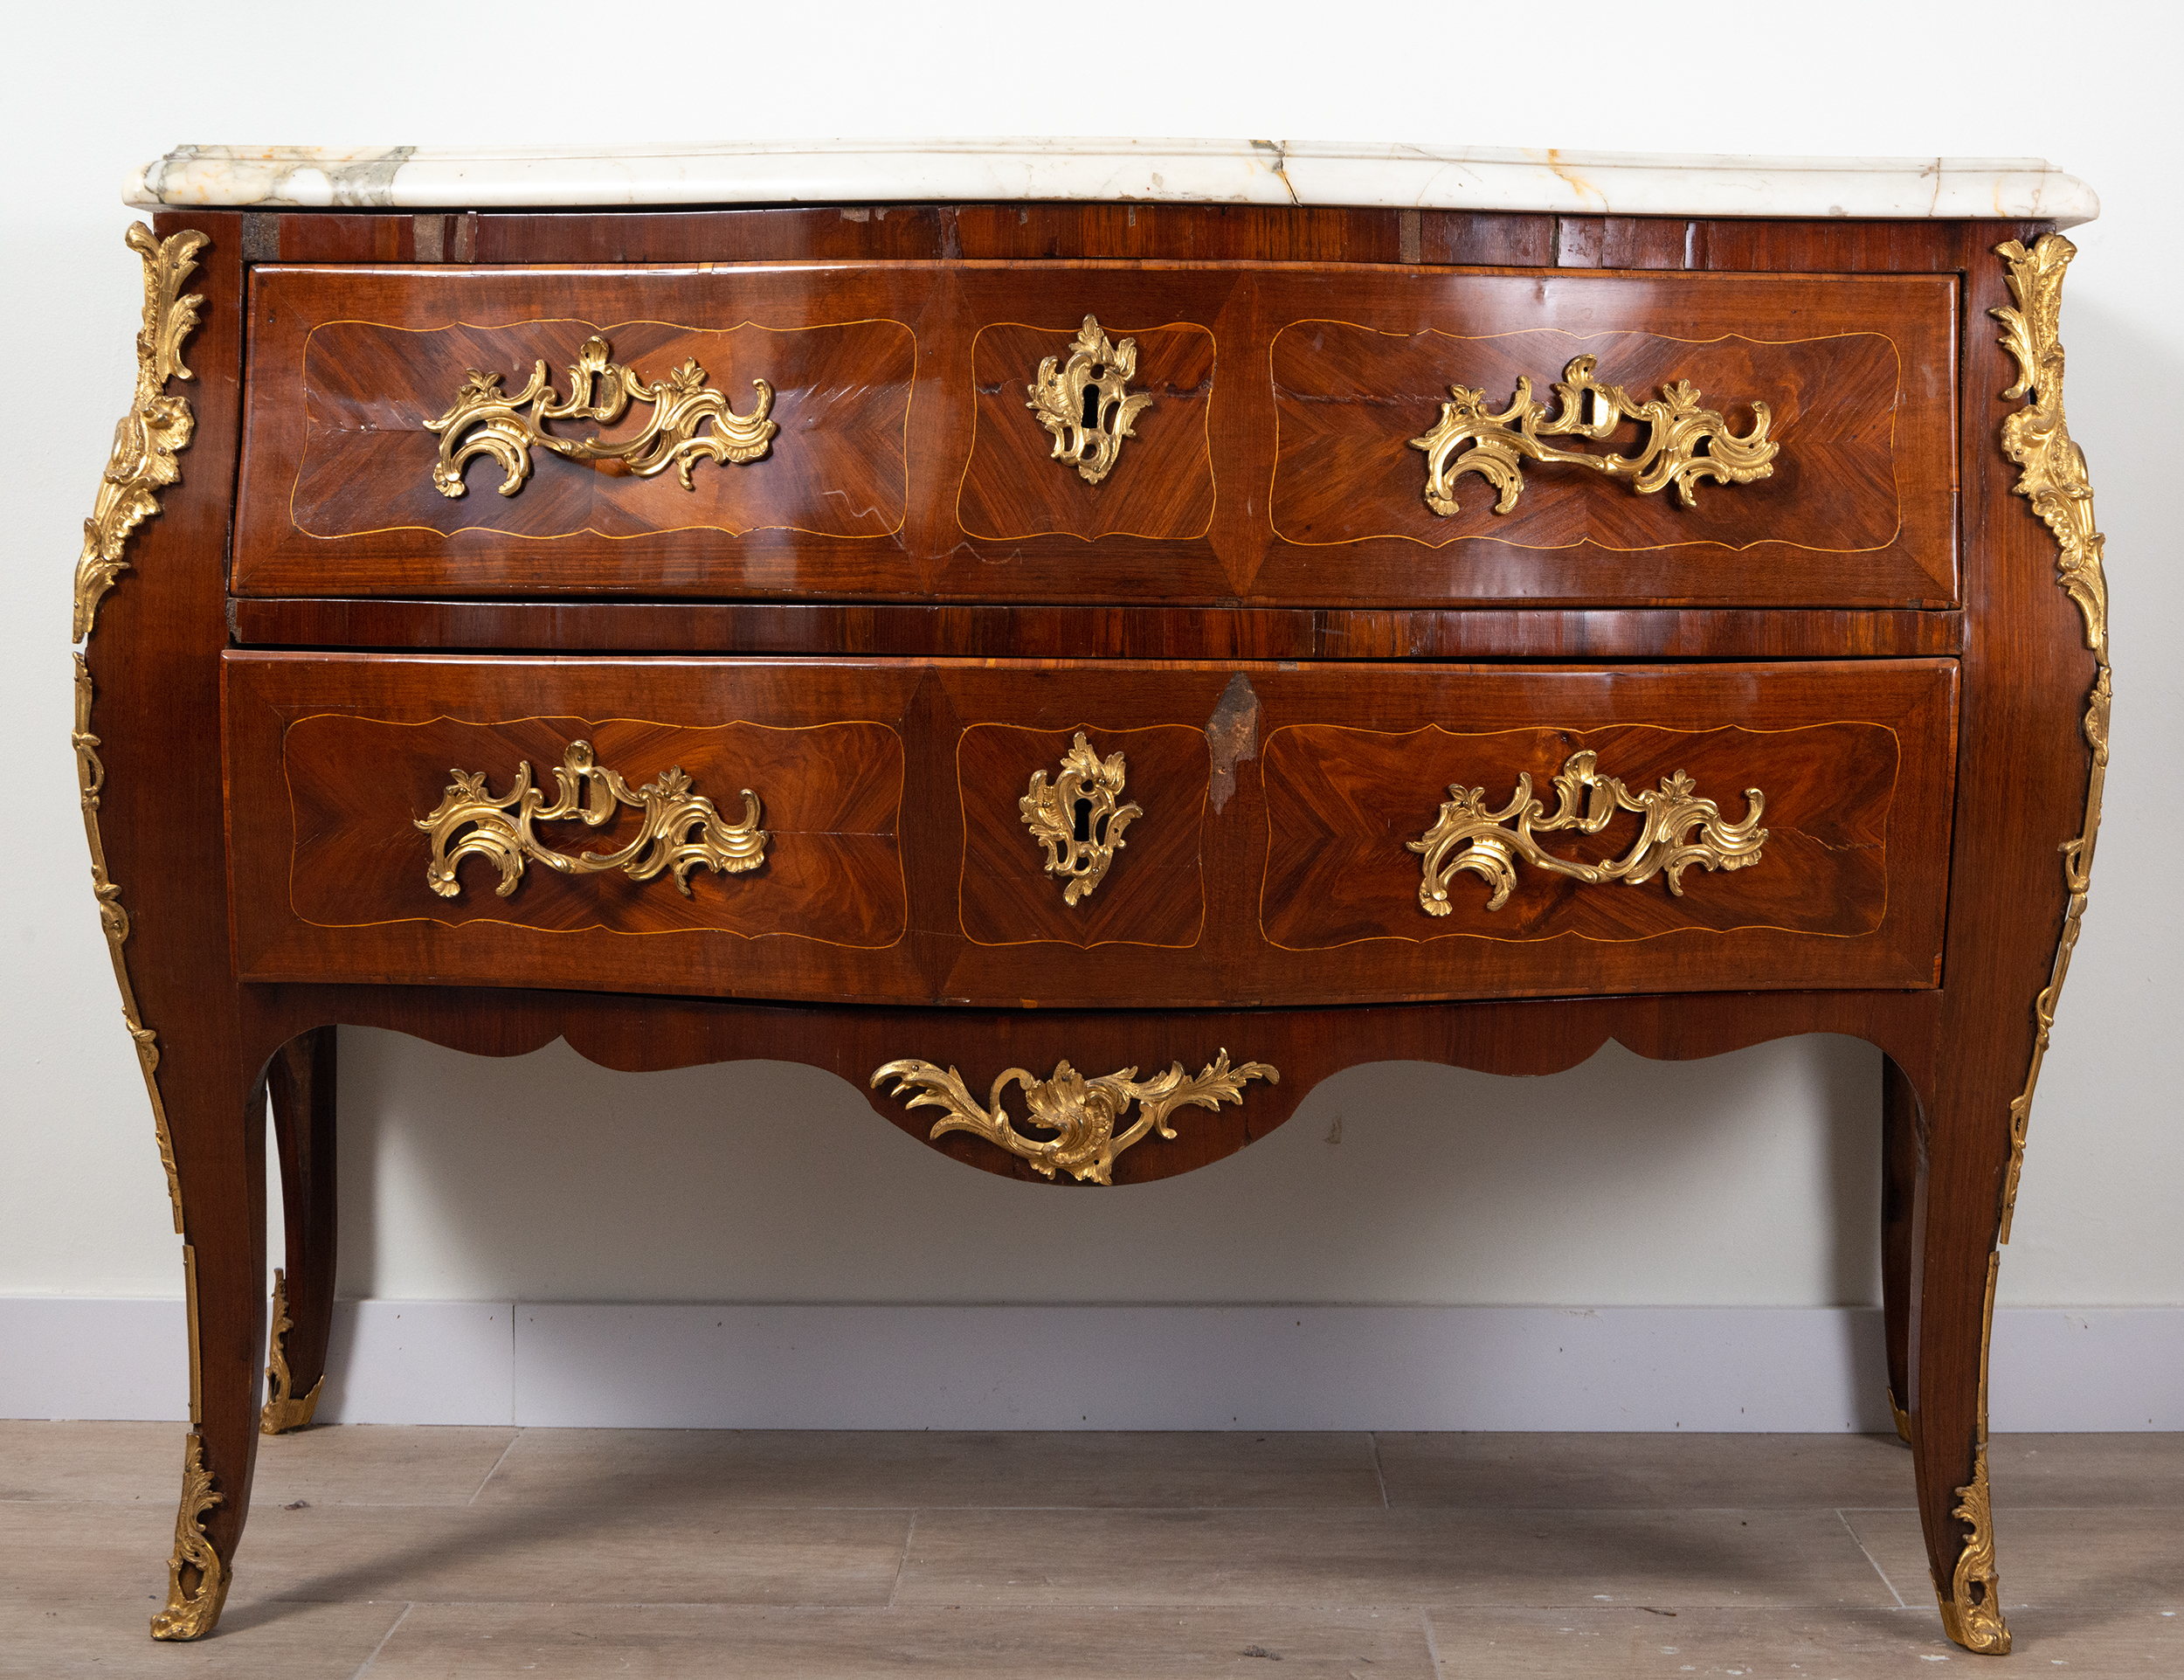 Important French chest of drawers Louis XV original stamped Antoine Mathieu Criard, 18th century